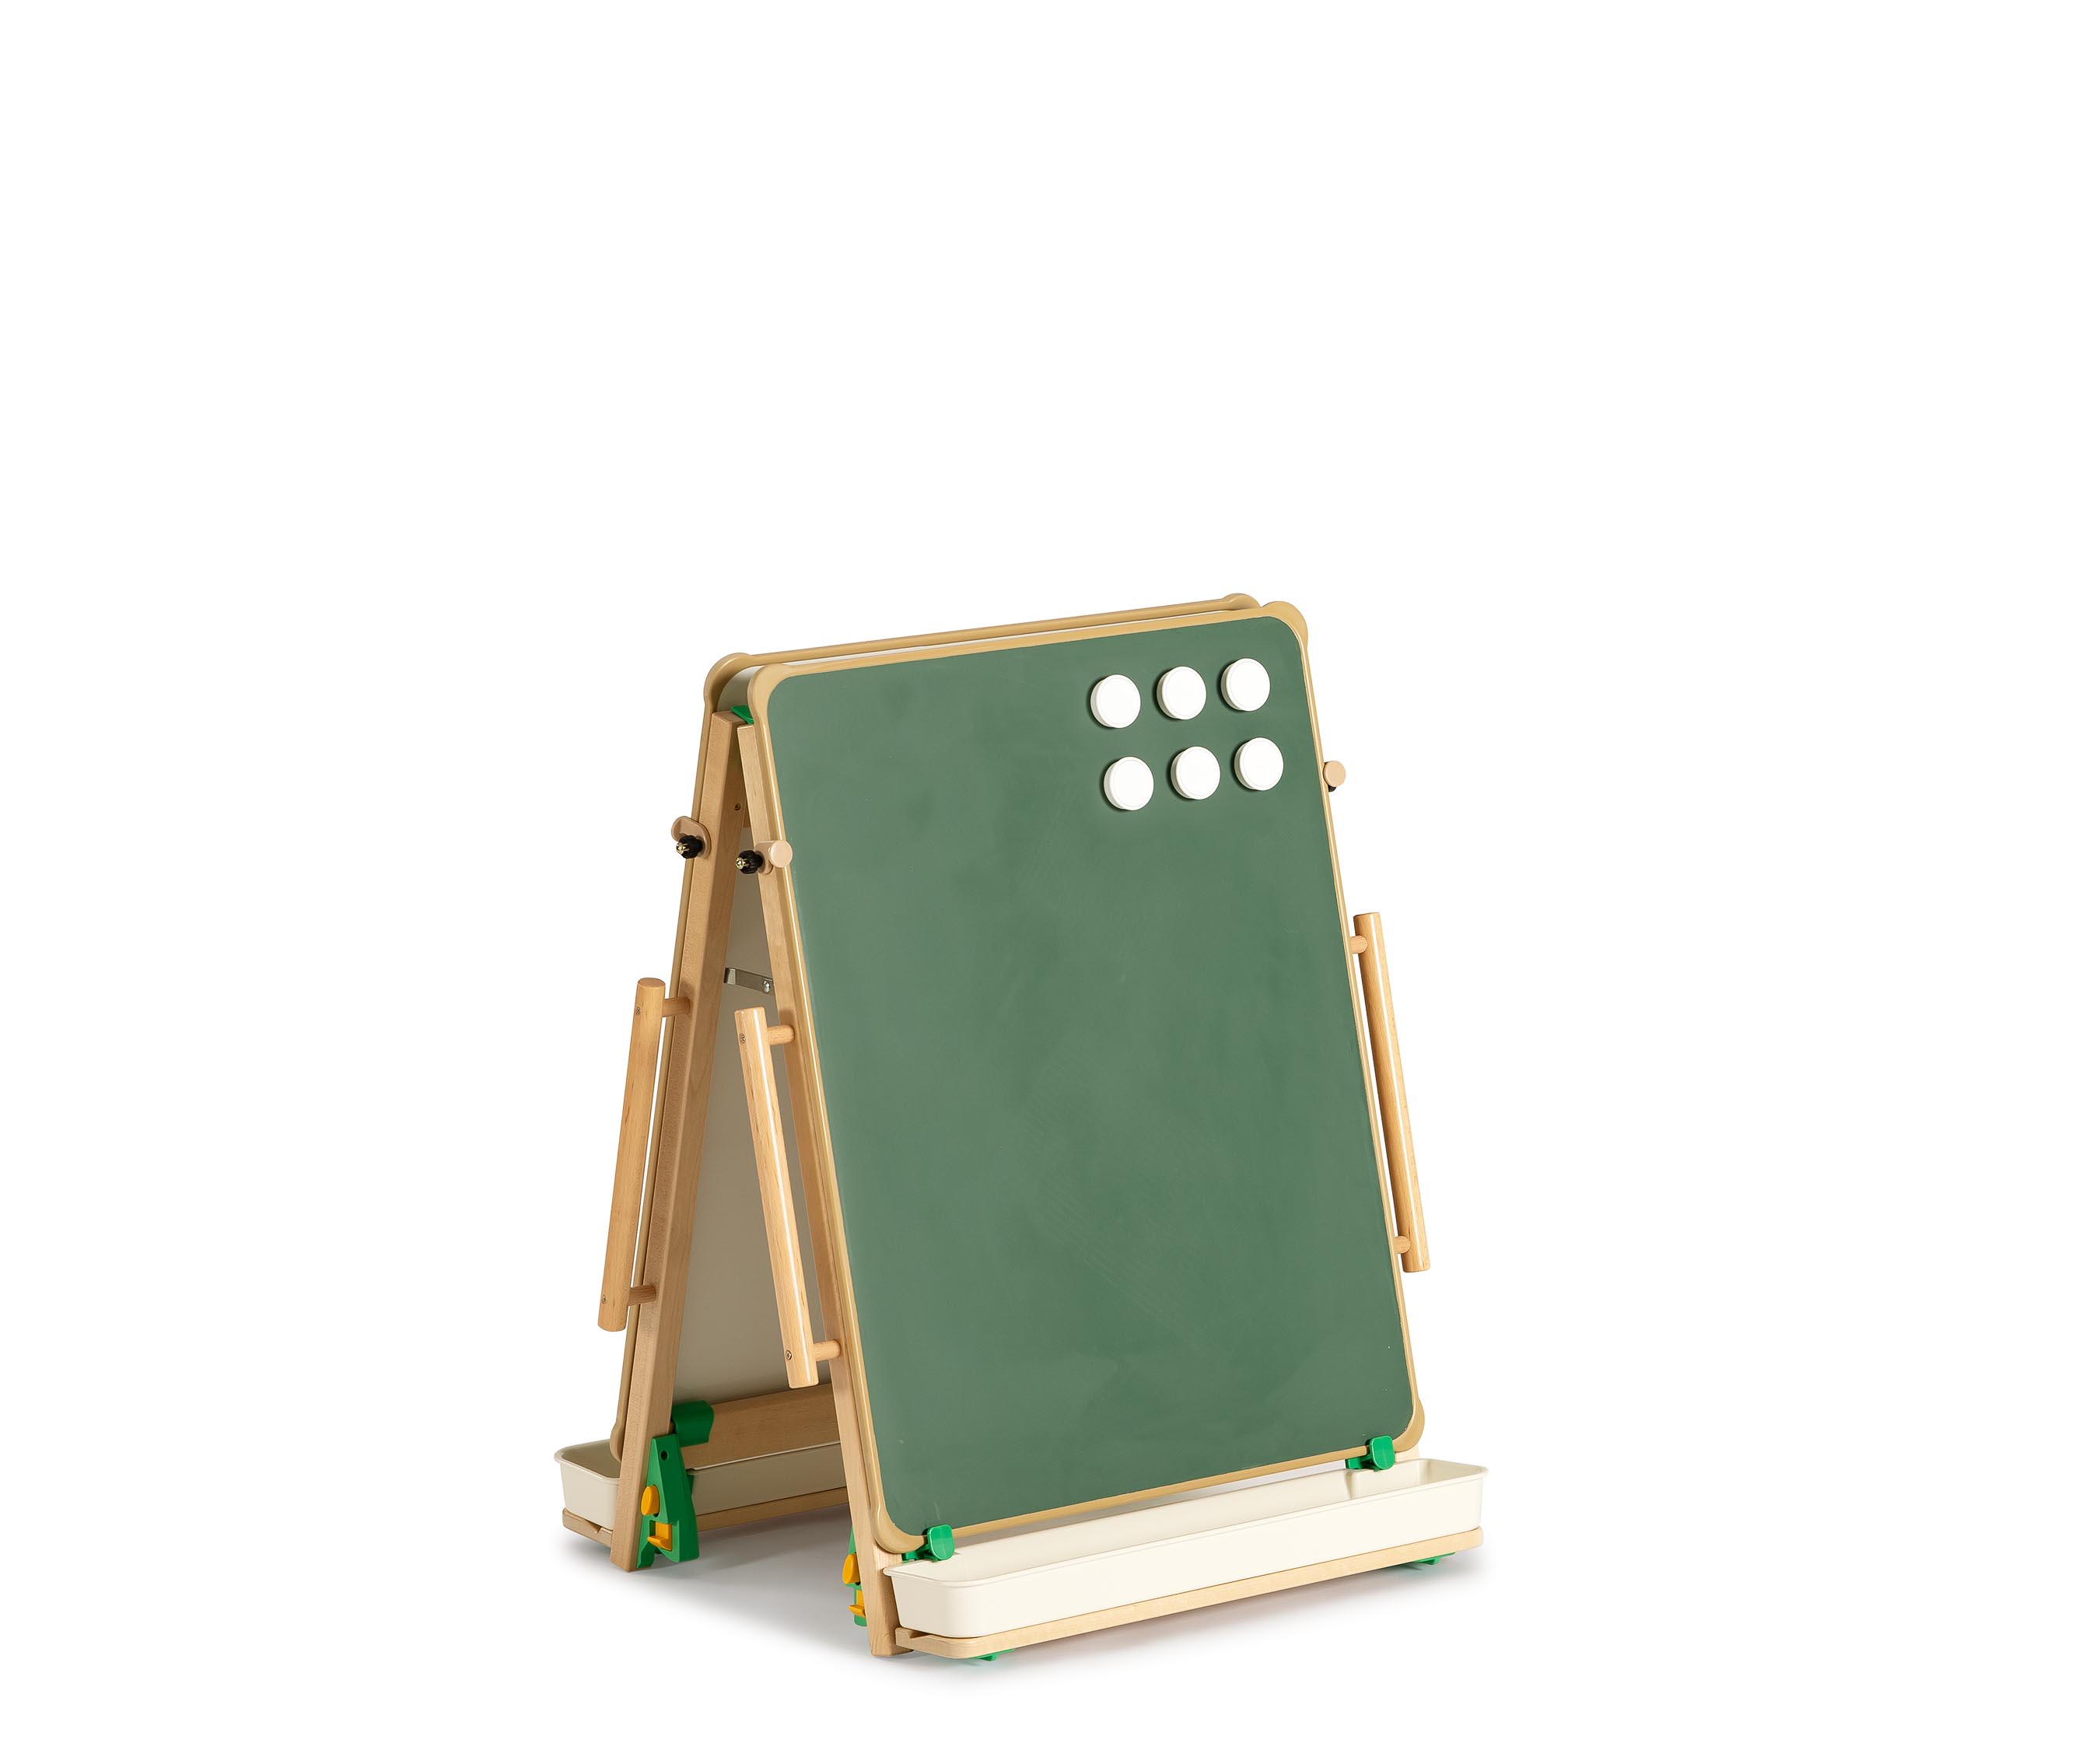 Best Metal Display Easels for Studios, Art Classes, Fairs, and